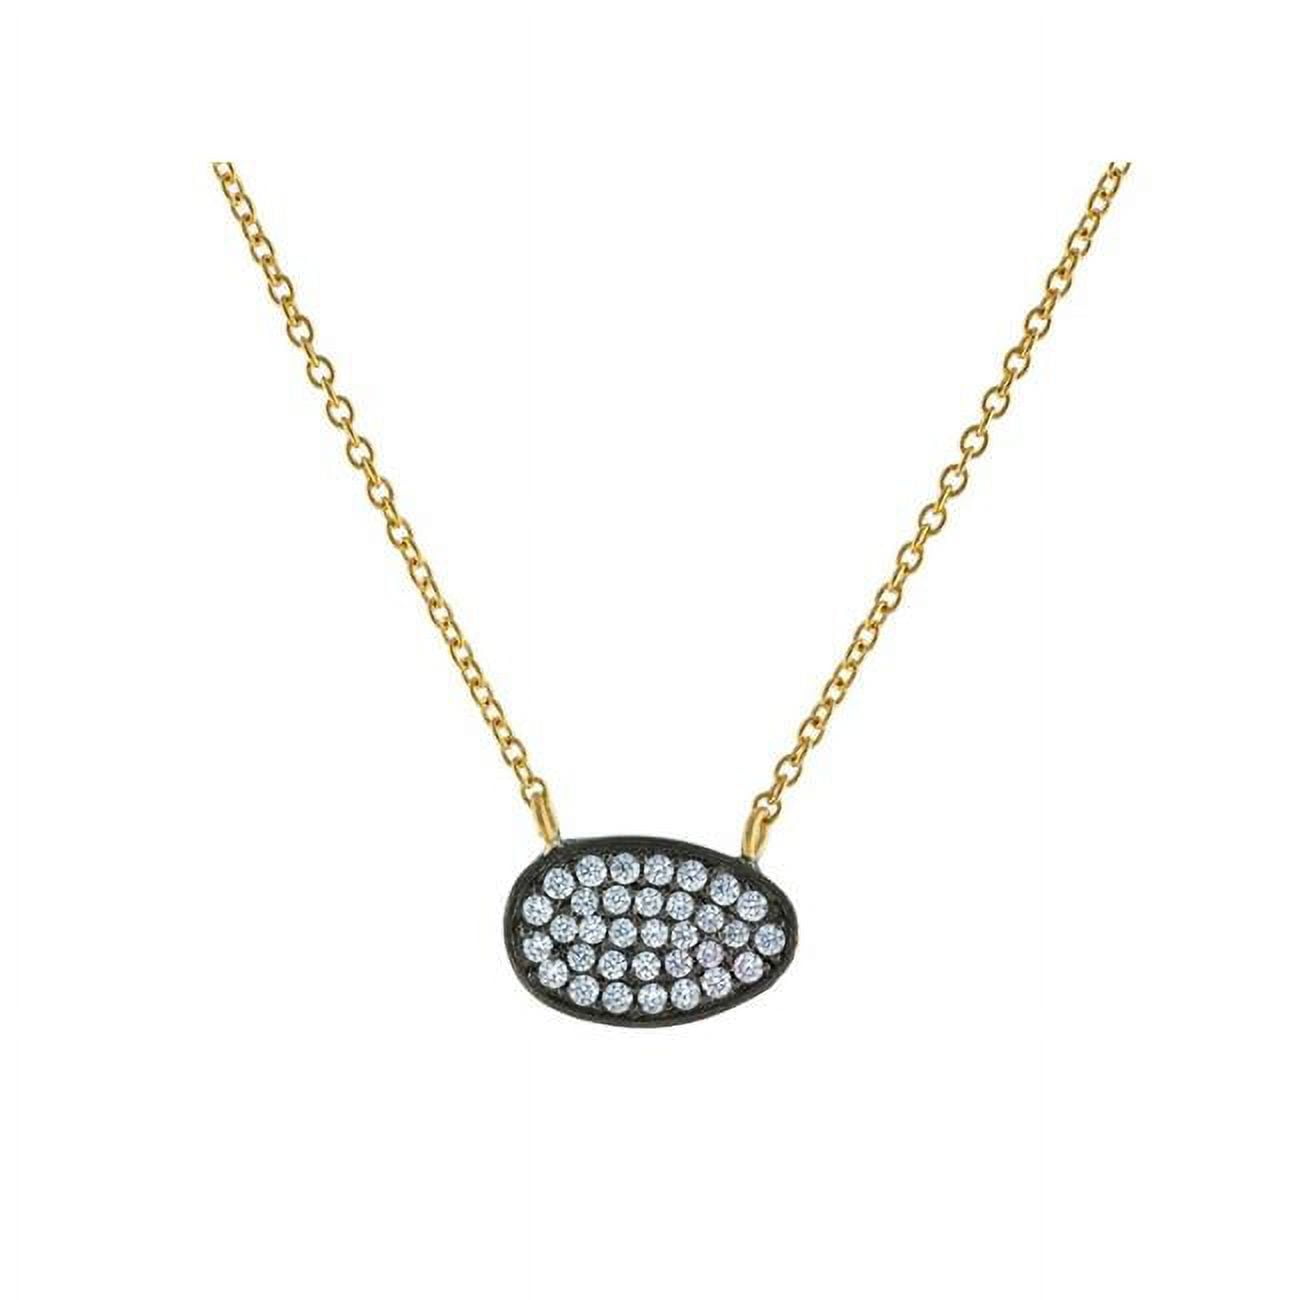 16 In. Plus 2 In. Extension Silver Black Rhodium & Gold Plated Chain, Cubic Zirconia Irregular Oval Shape Pendant Necklace